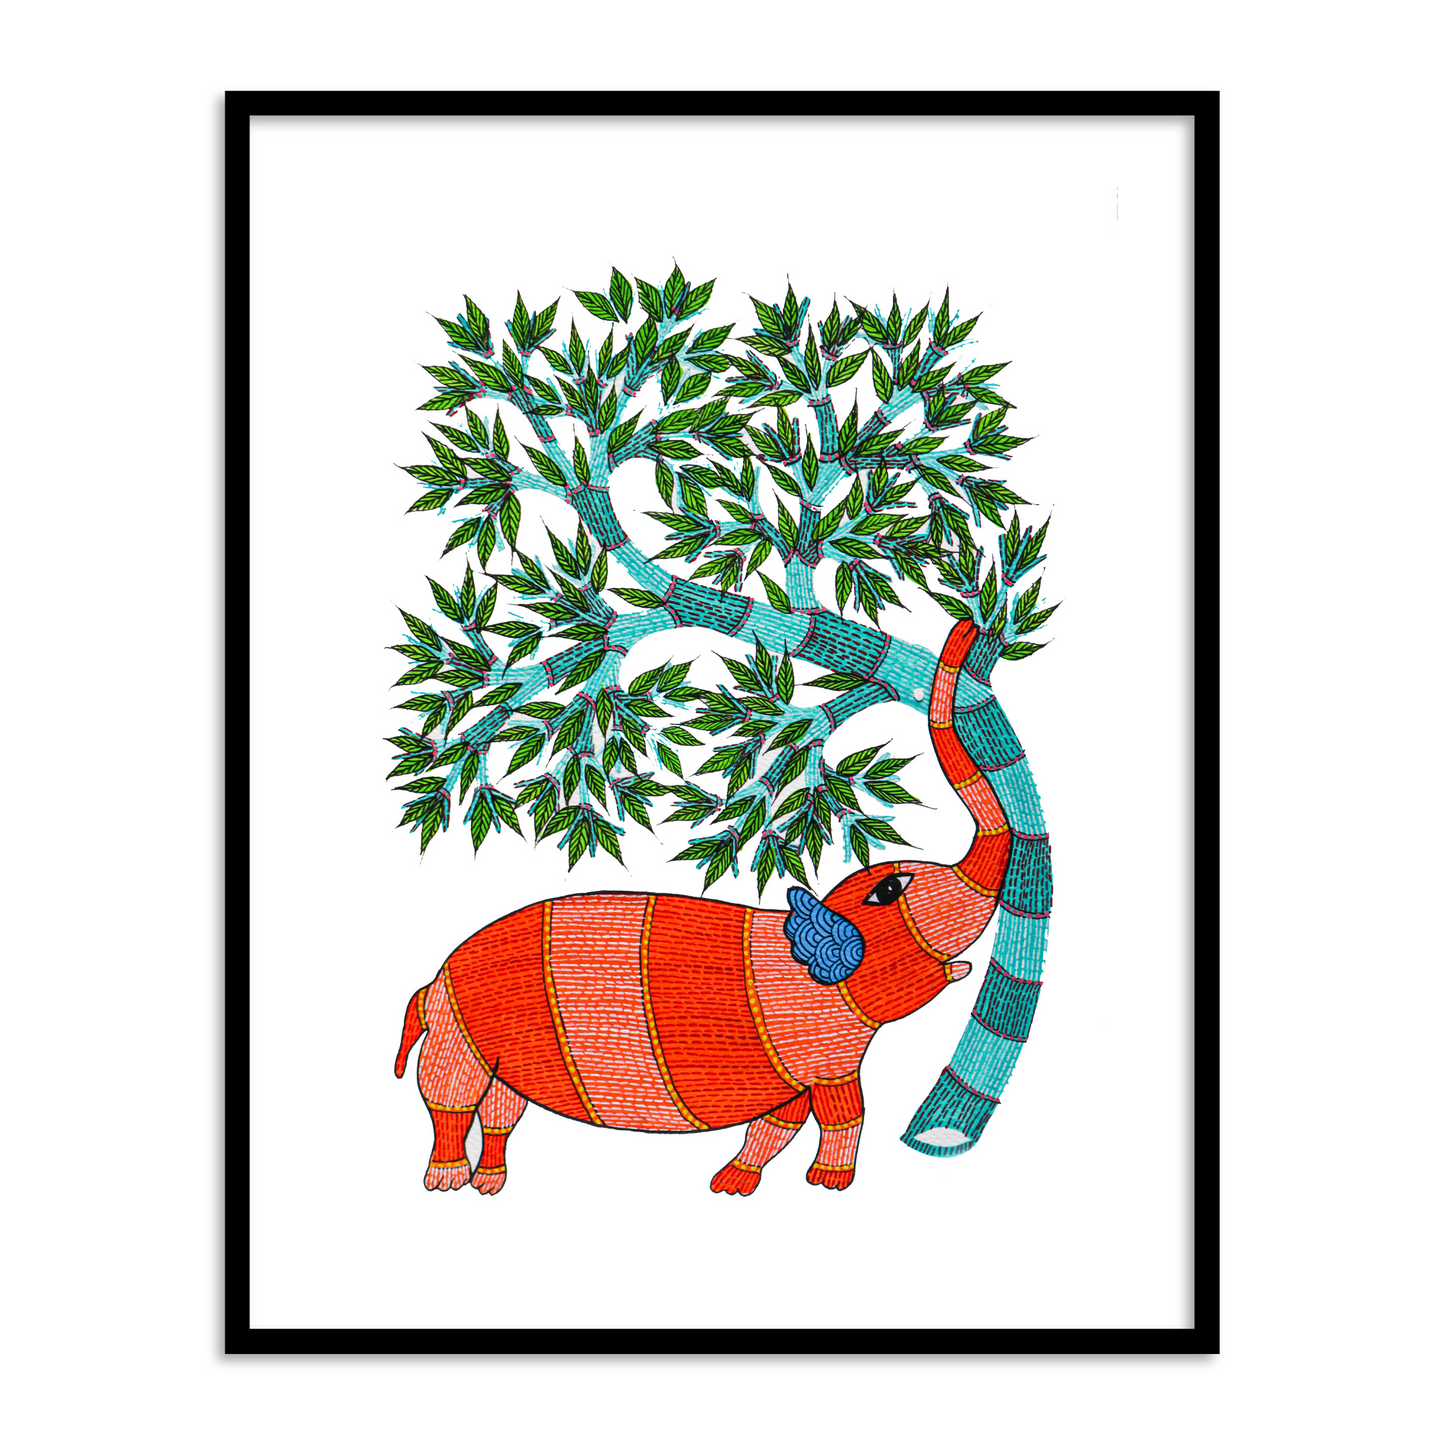 Elephant with a Tree - Gond Painting | Framed Wall Art Decor